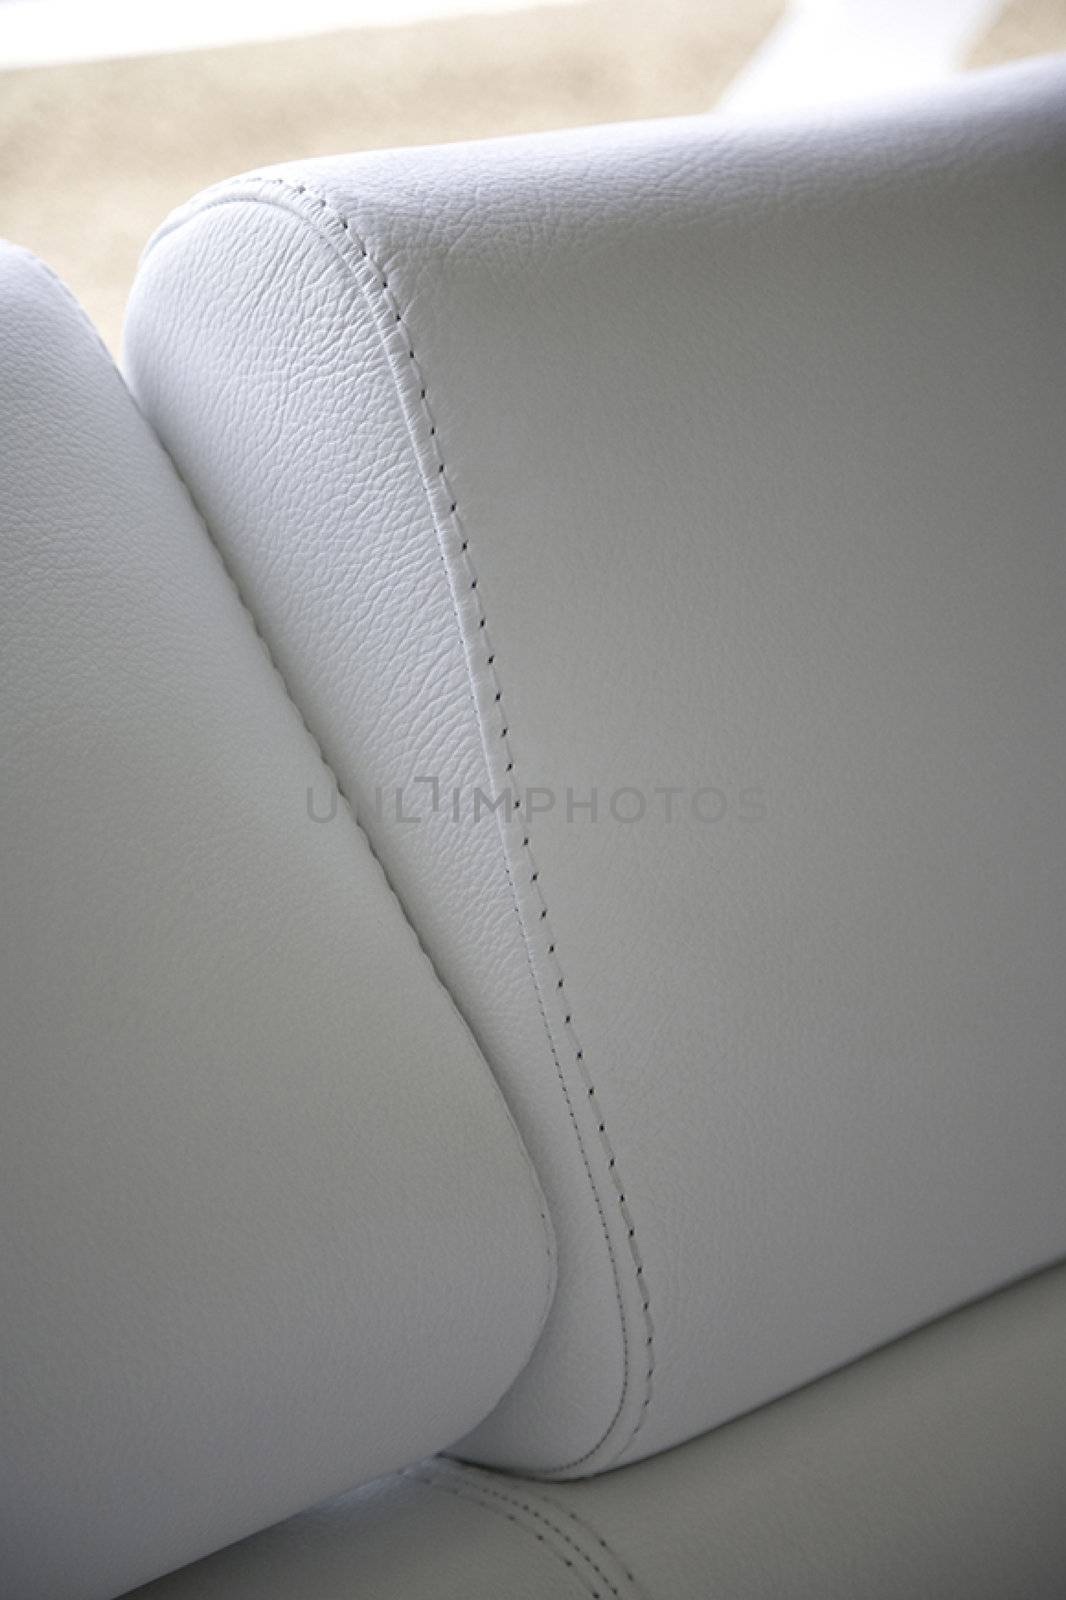 White armchair close-up with surface and sewing detail